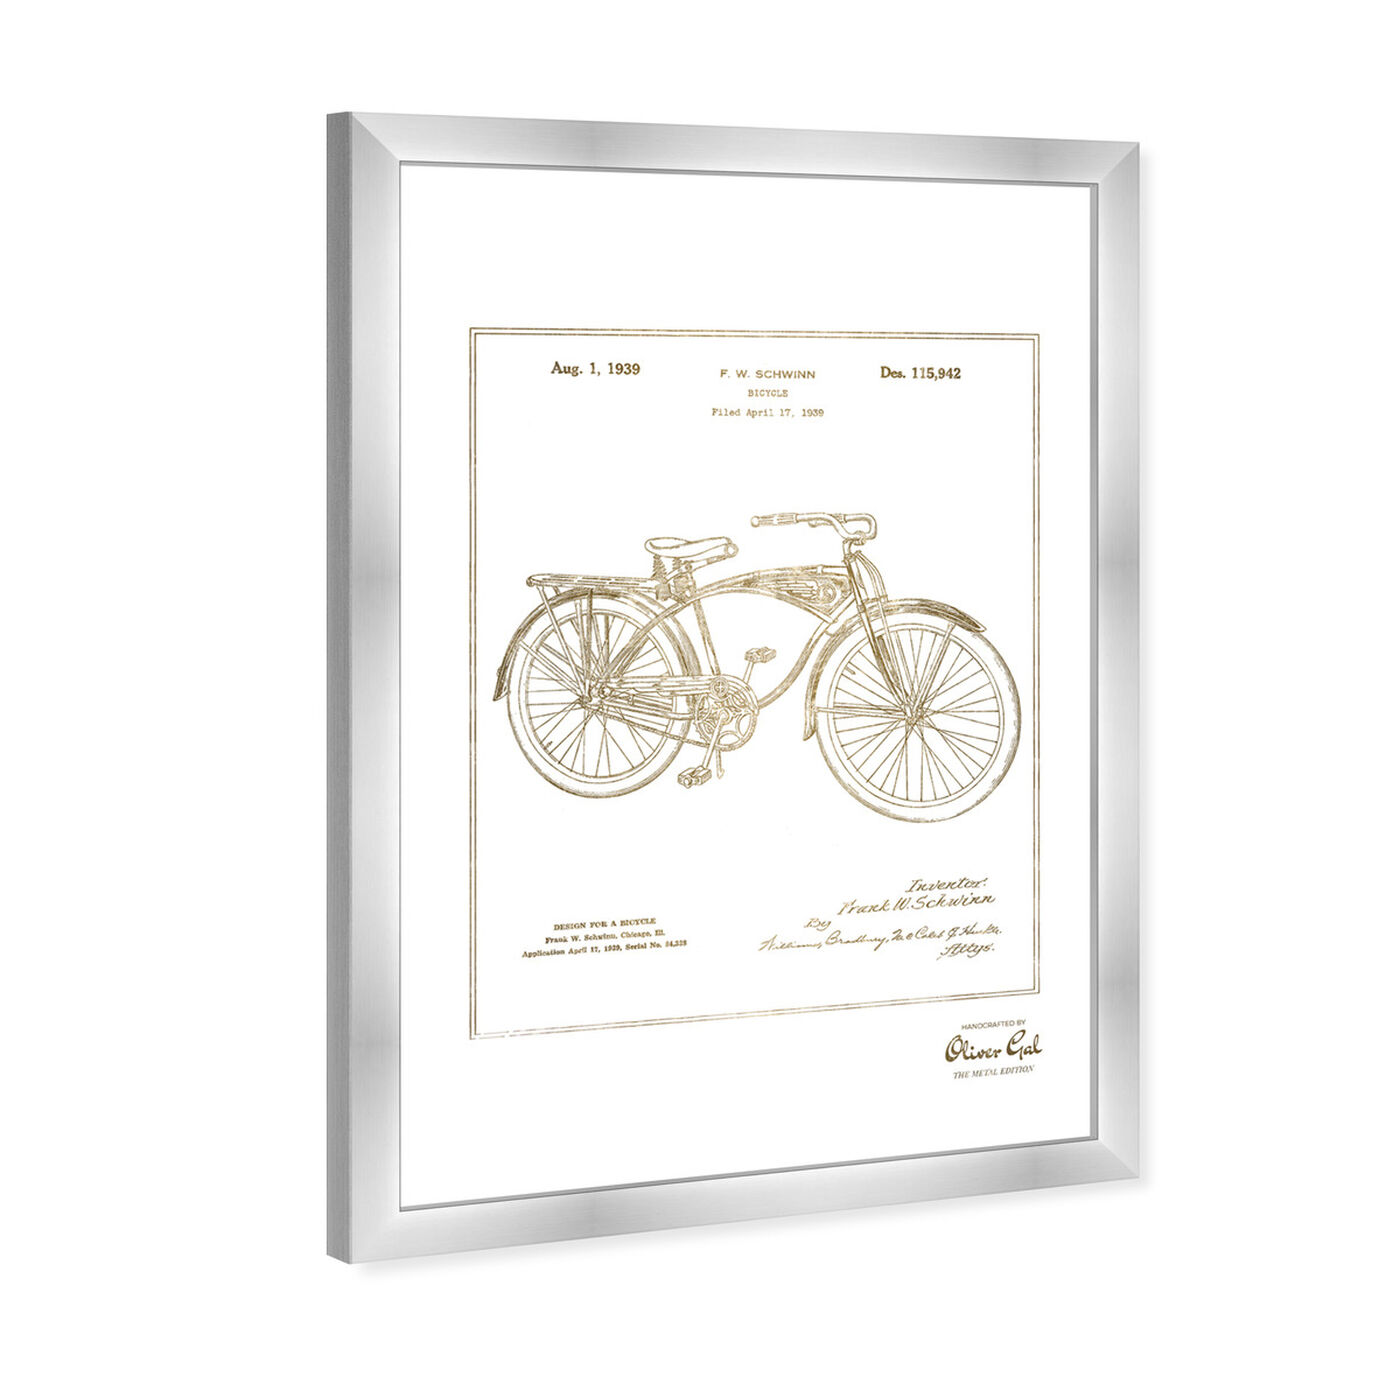 Angled view of Schwinn Bicycle Gold featuring transportation and motorcycles art.